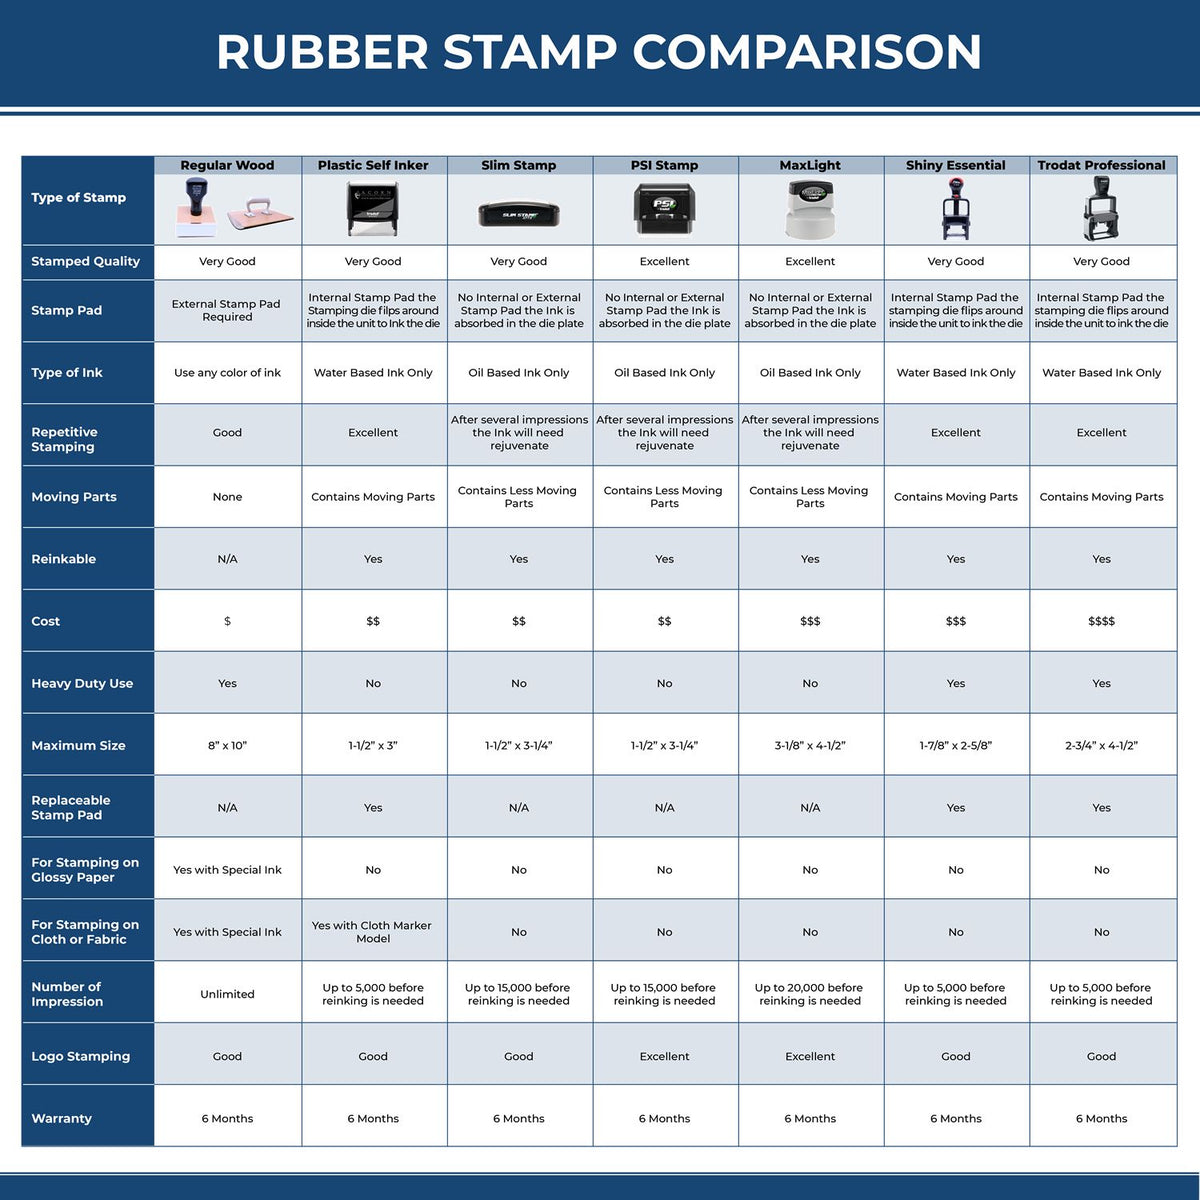 Large Self-Inking Covid-19 Tested Stamp 5514S Rubber Stamp Comparison